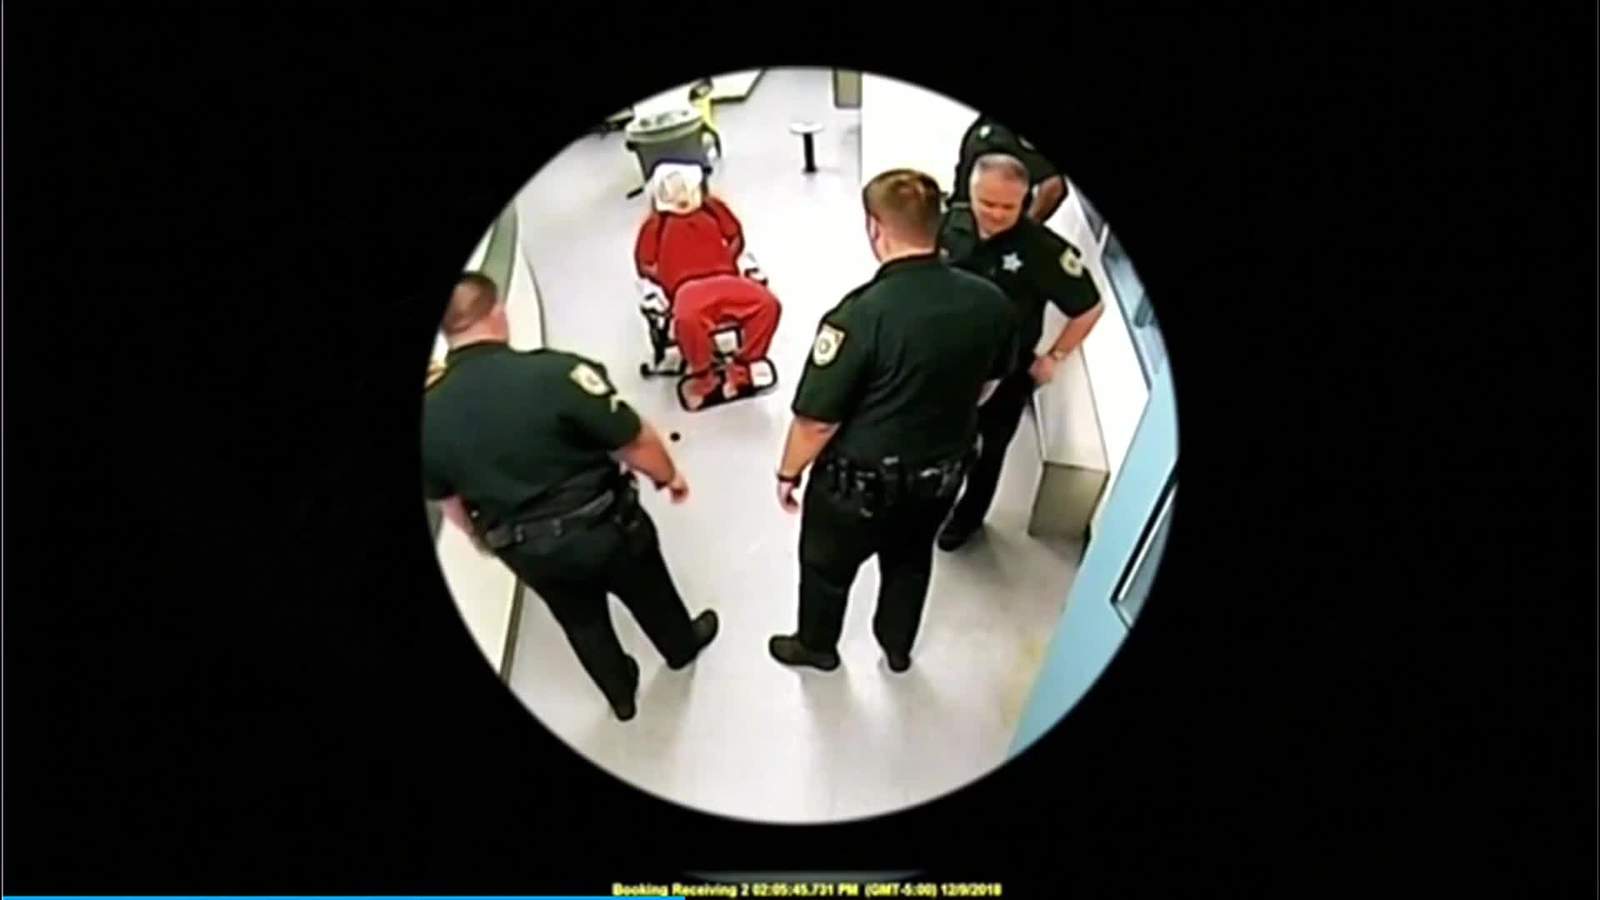 Raw video shows Gregory Edwards' confrontation with Brevard deputies before his death